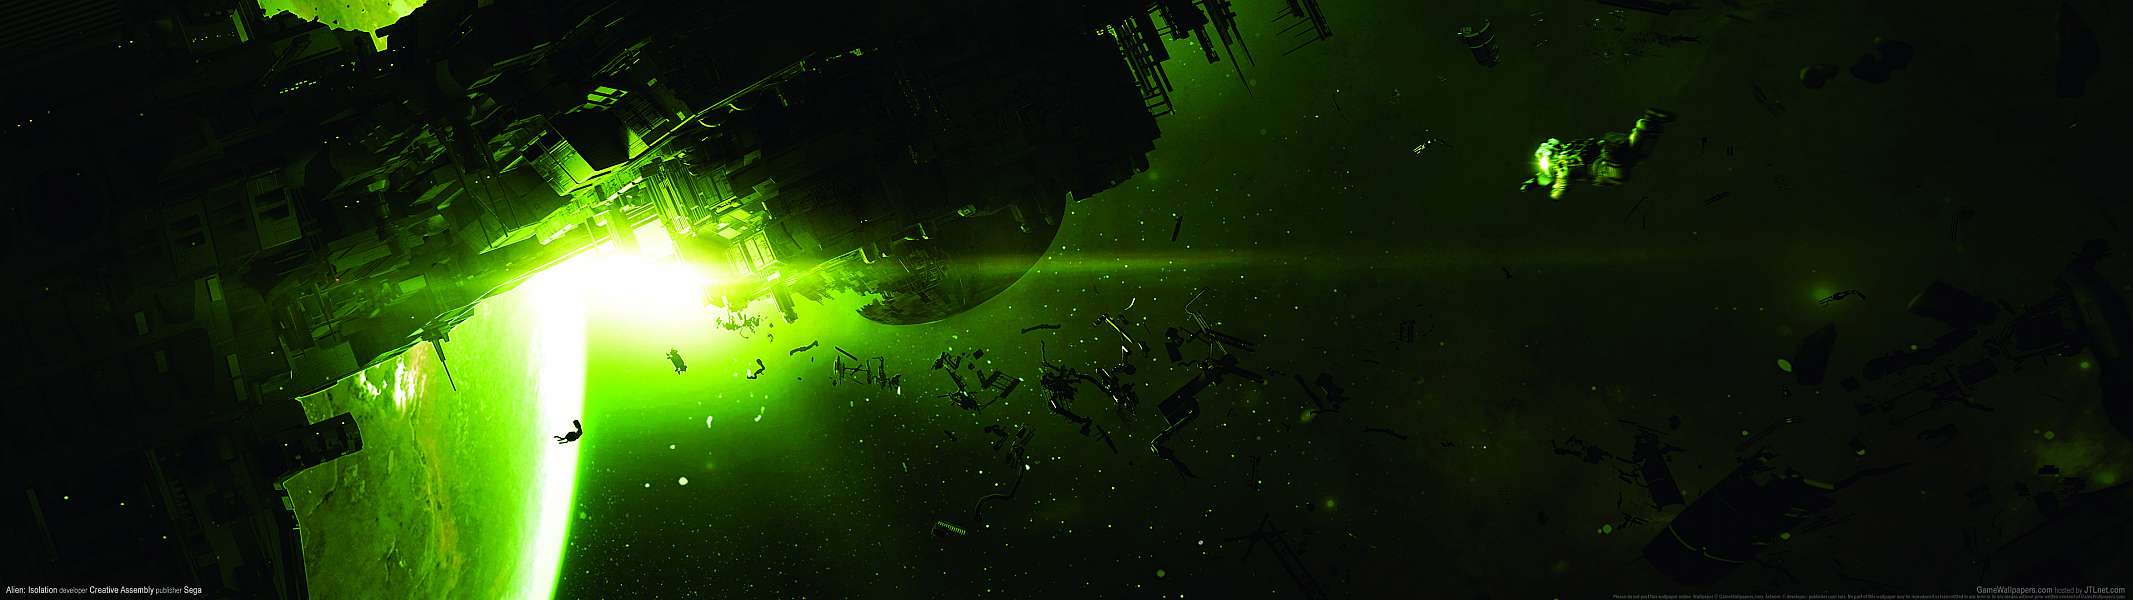 Alien: Isolation dual screen wallpaper or background